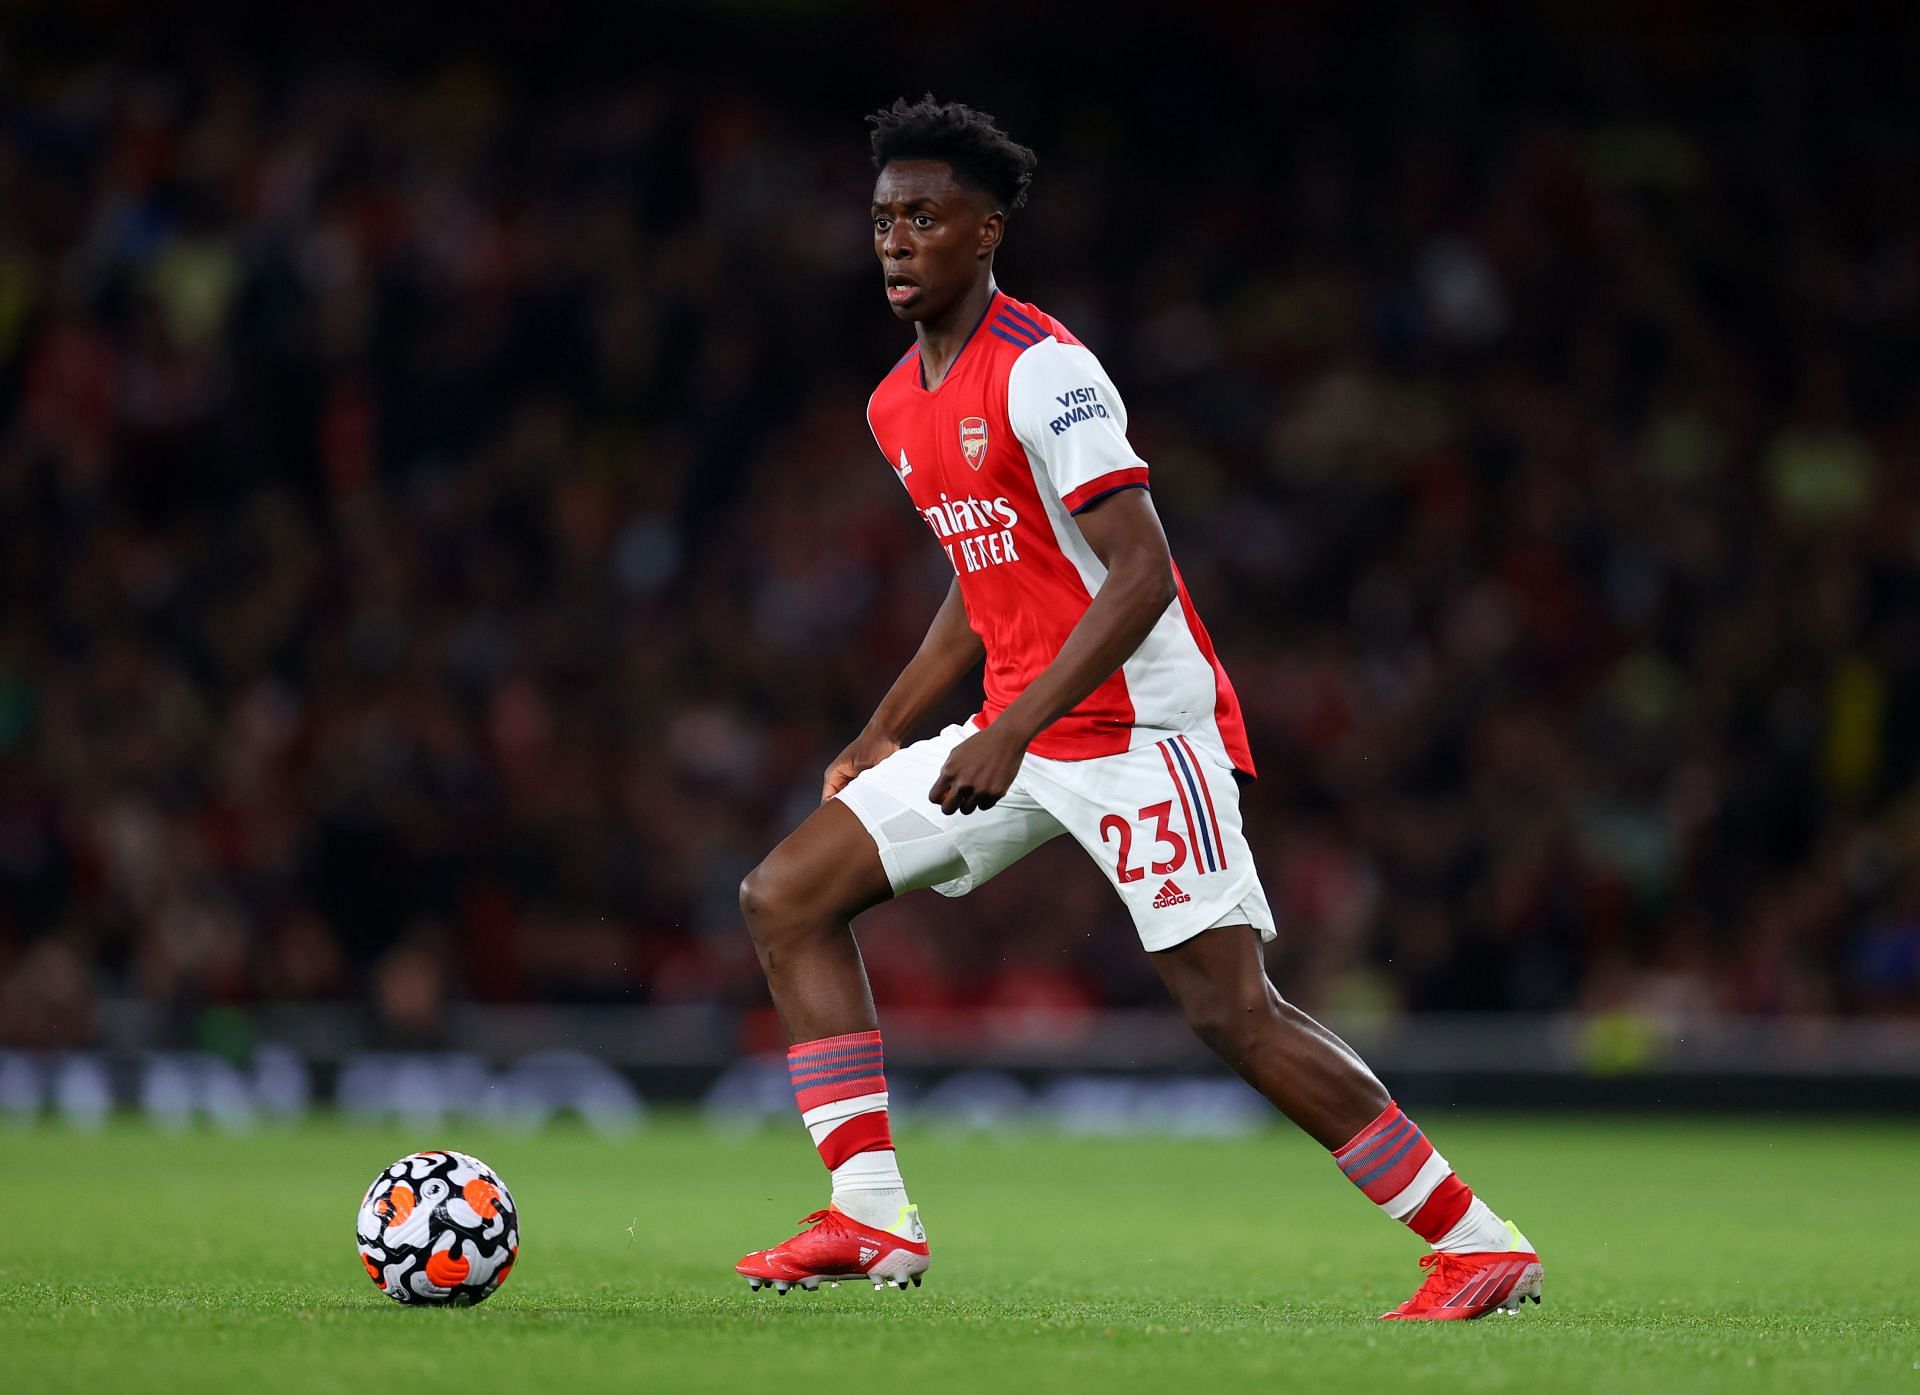 In his short time at Arsenal, Lokonga has impressed with his passing range and honesty in his approach to football.